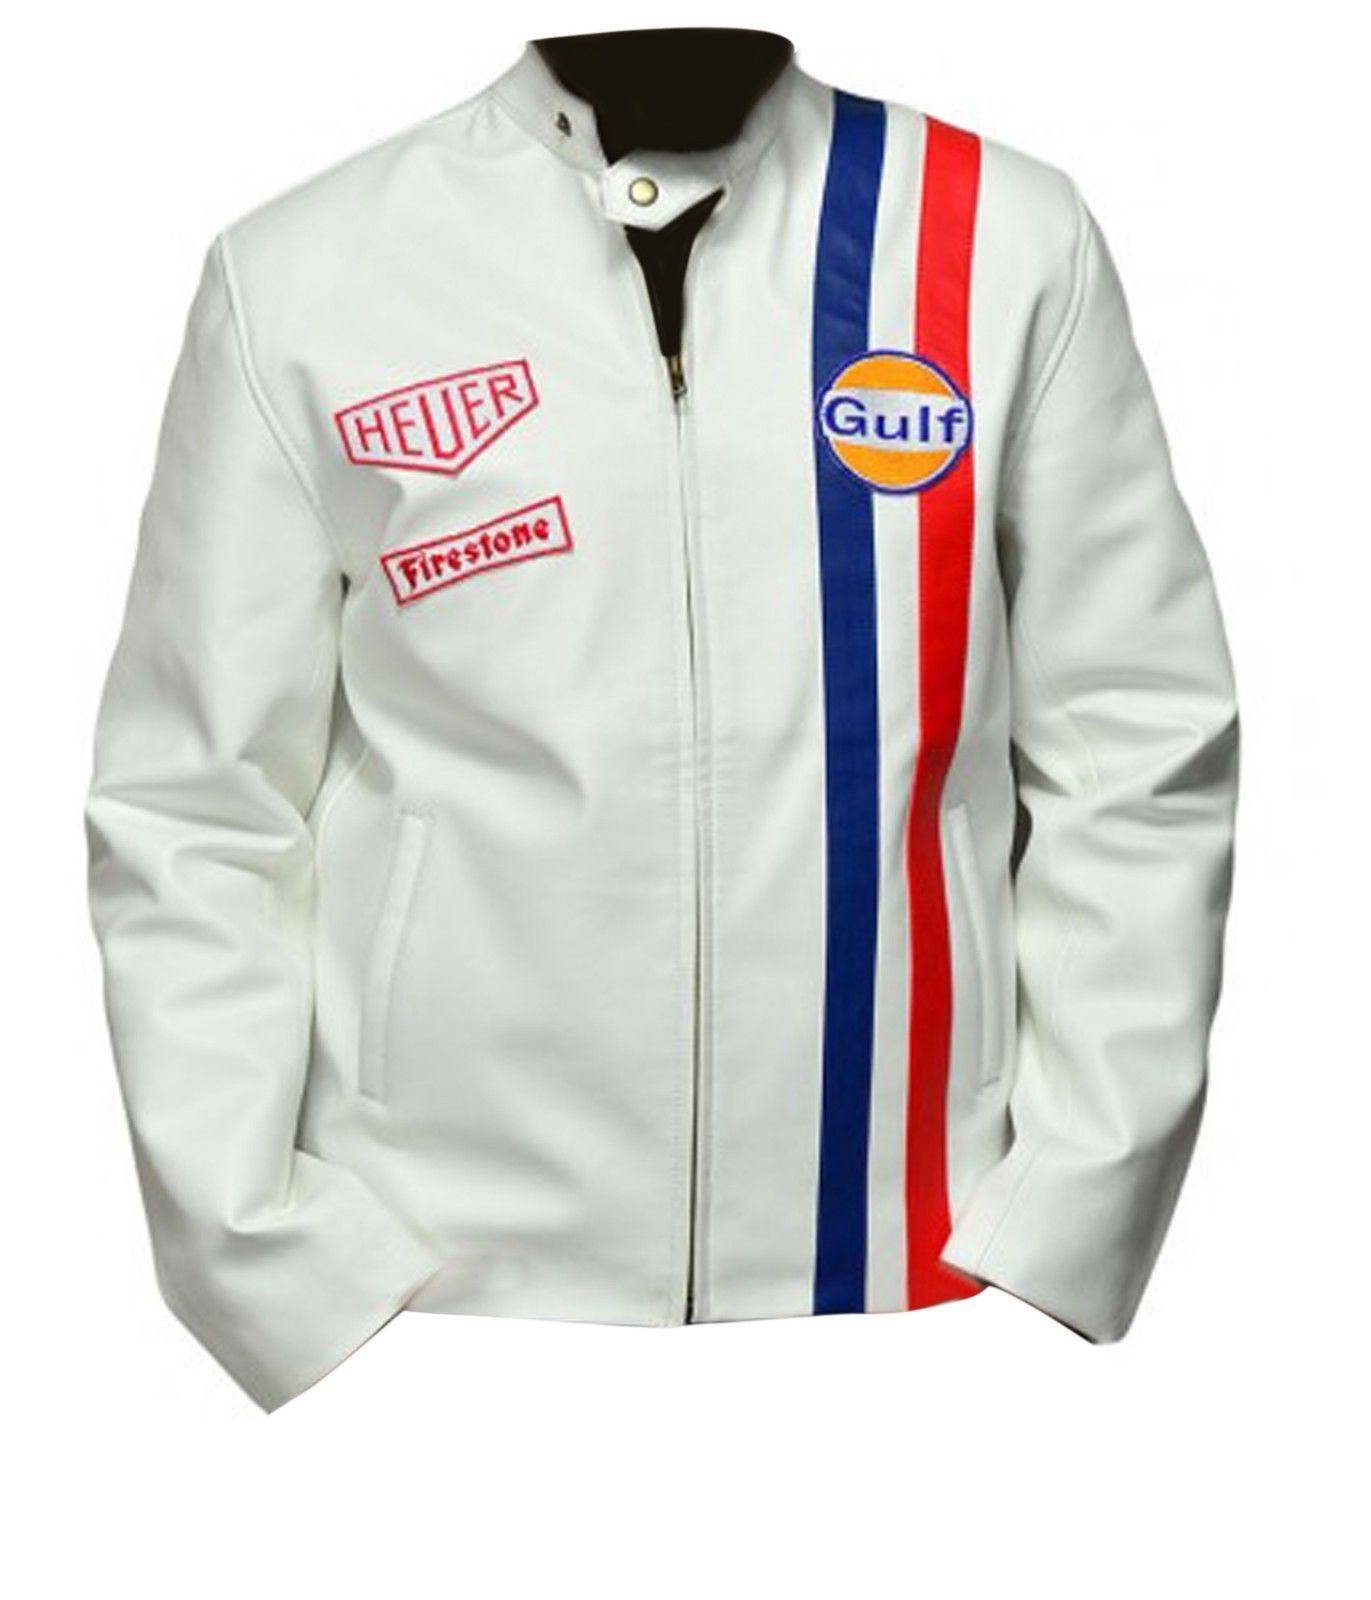 Mens Steve McQueen Le Mans White Gulf Racing Style Stripes White Leather Jacket